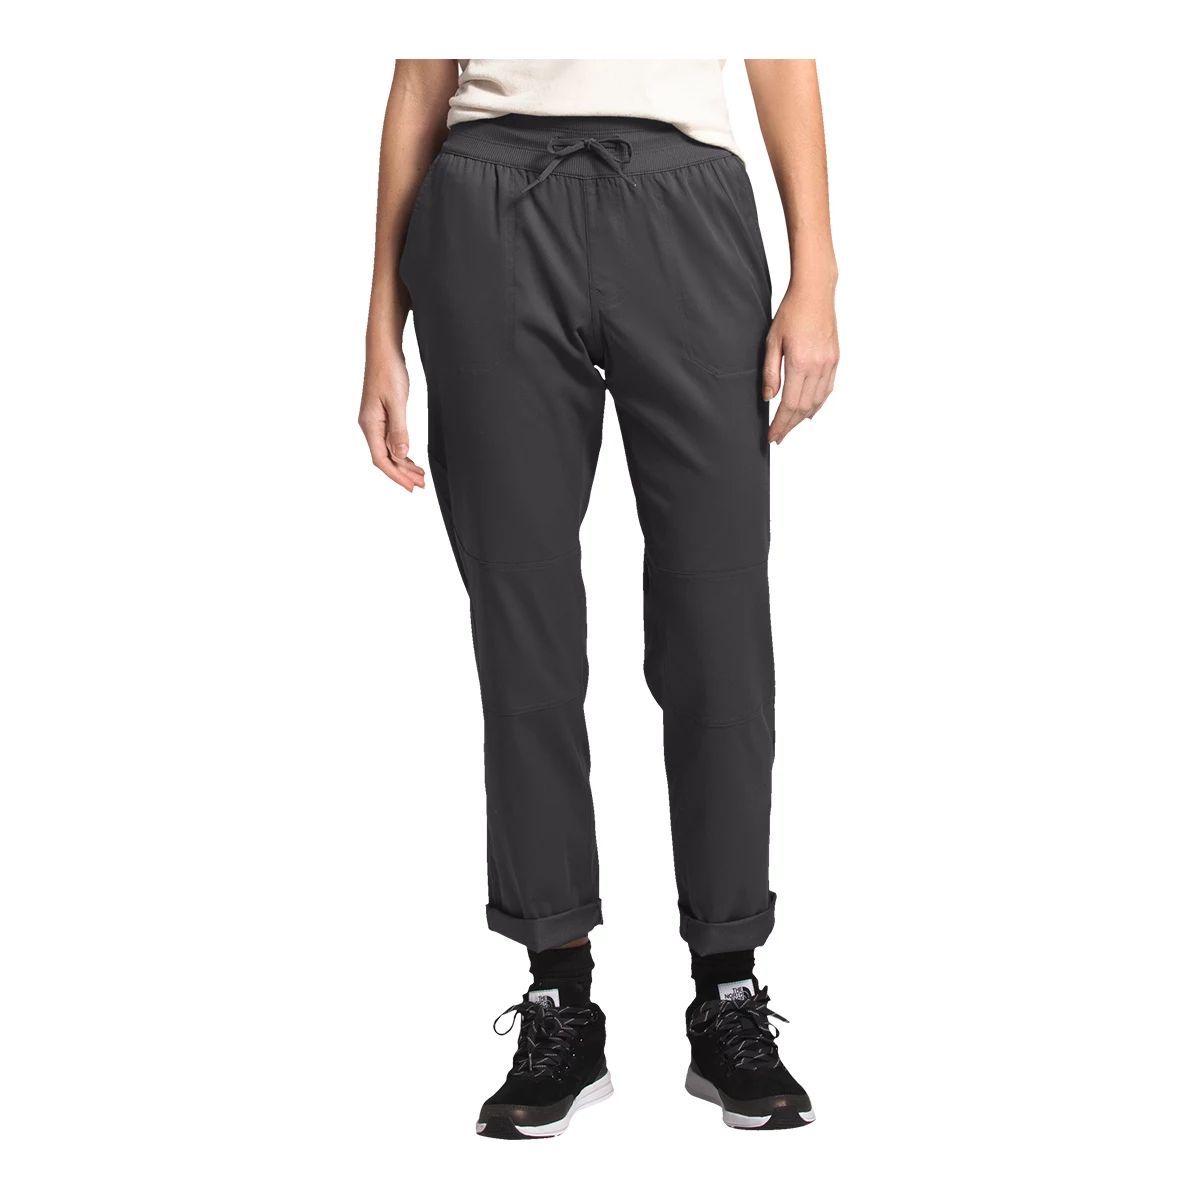 https://media-www.atmosphere.ca/product/div-03-softgoods/dpt-72-casual-clothing/sdpt-02-womens/333082592/tnf-w-aphrodite-motion-pant-s-graphite-grey-xs--7d827247-465a-41f5-a025-b3f26e1b90b2-jpgrendition.jpg?imdensity=1&imwidth=1244&impolicy=mZoom